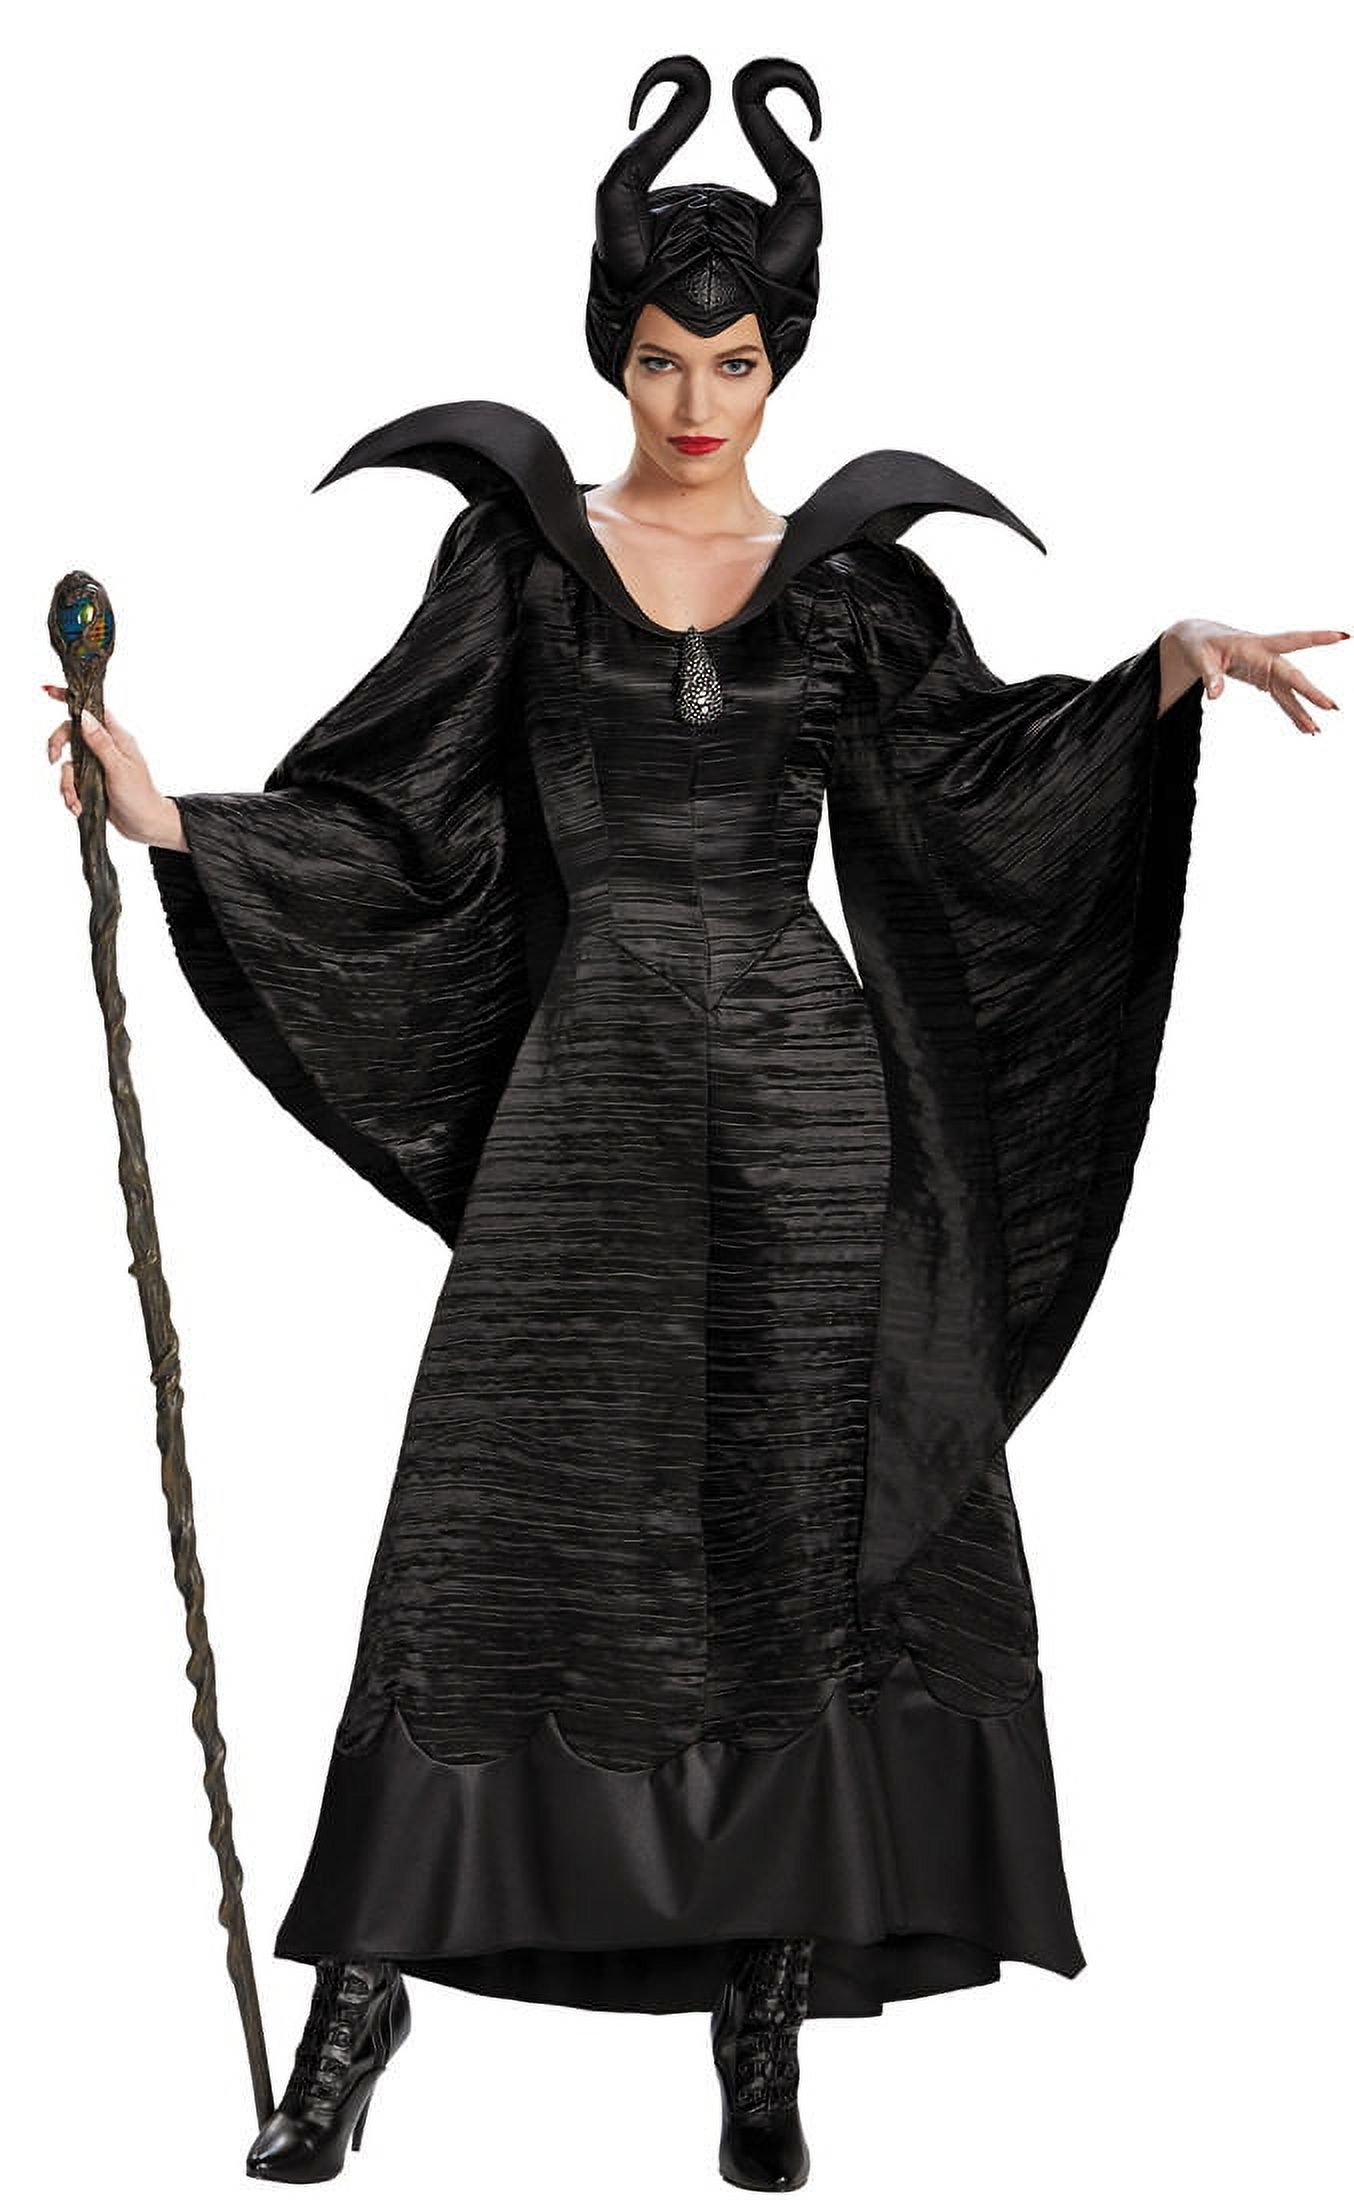 Maleficent Staff Classic Halloween Accessory - image 3 of 4